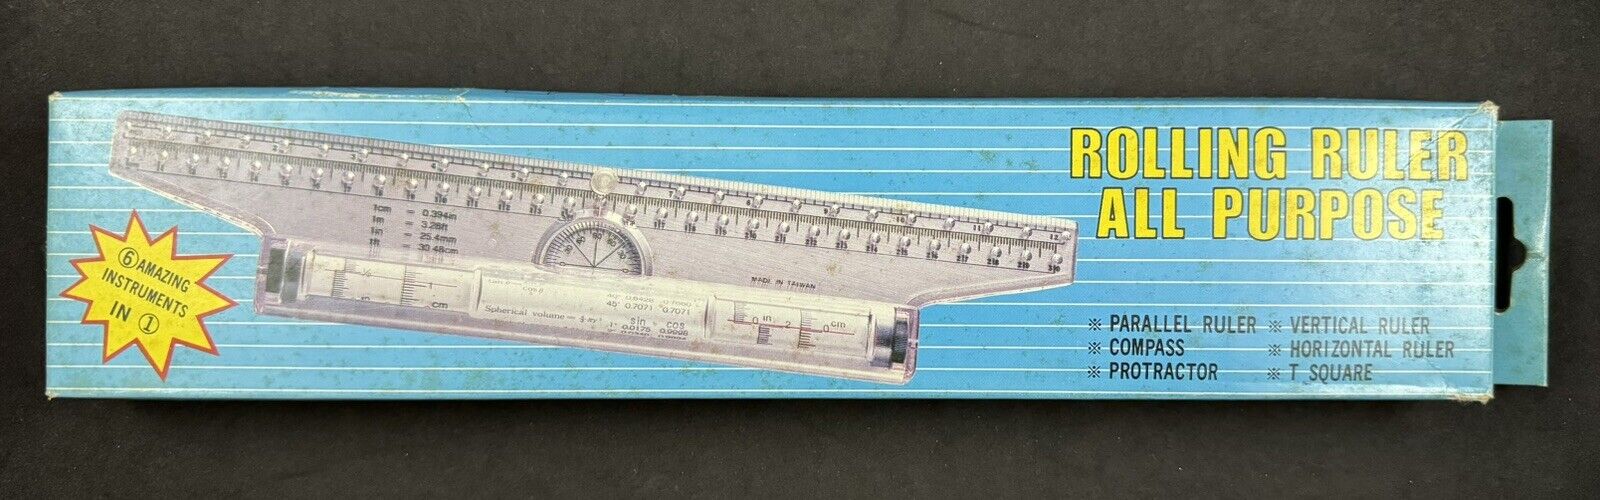 Vintage All-Purpose 6 in 1 Rolling Ruler